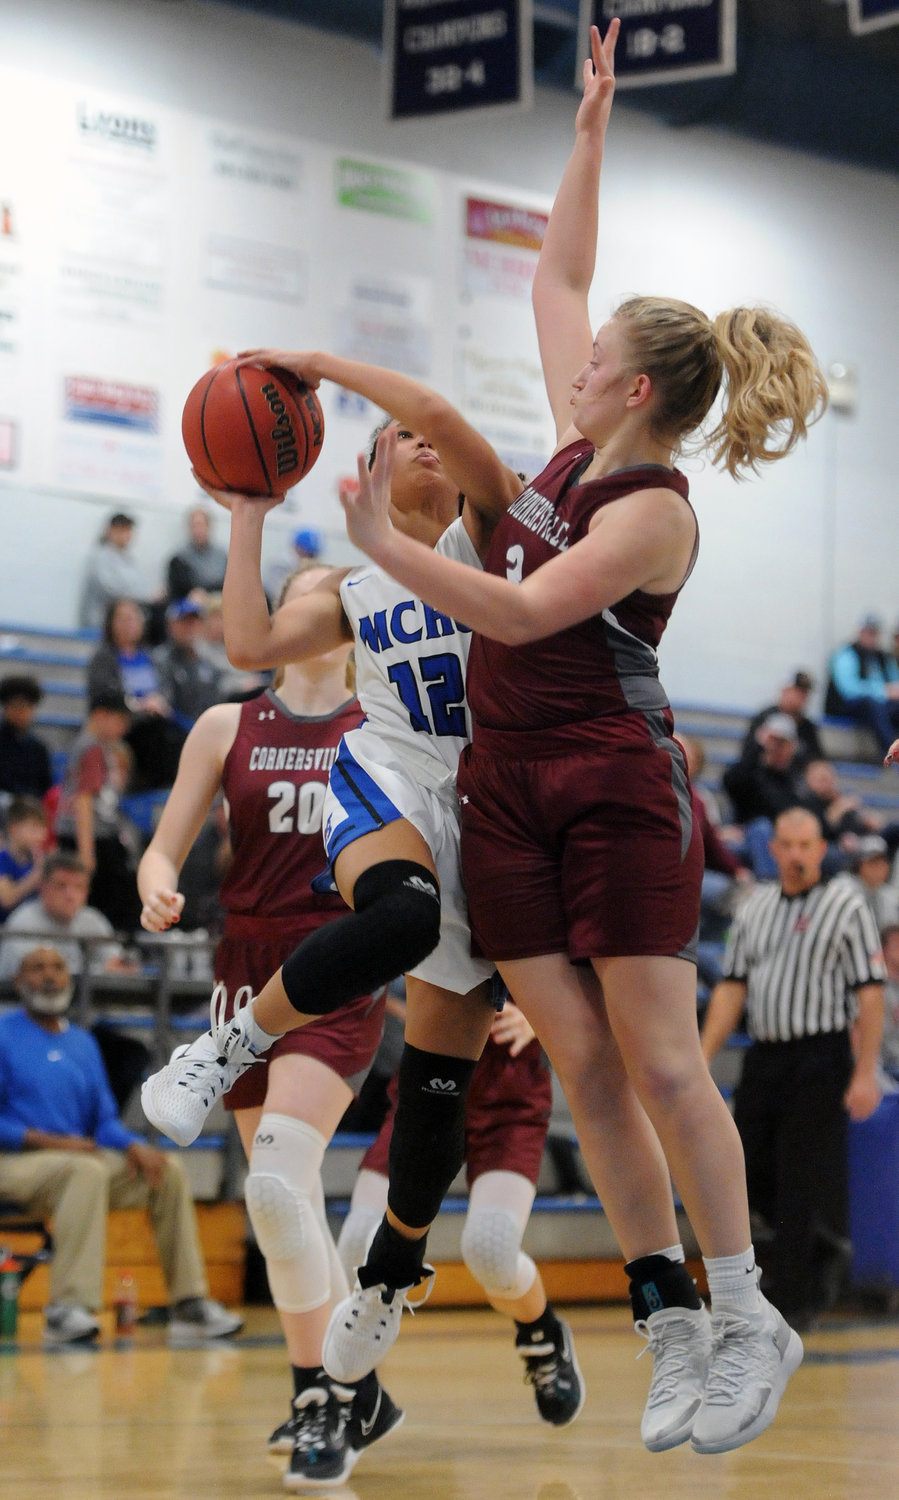 Kayla Keiler drives to the basket and draws the foul against Cornersville. She led the Tigerettes with 13 points.